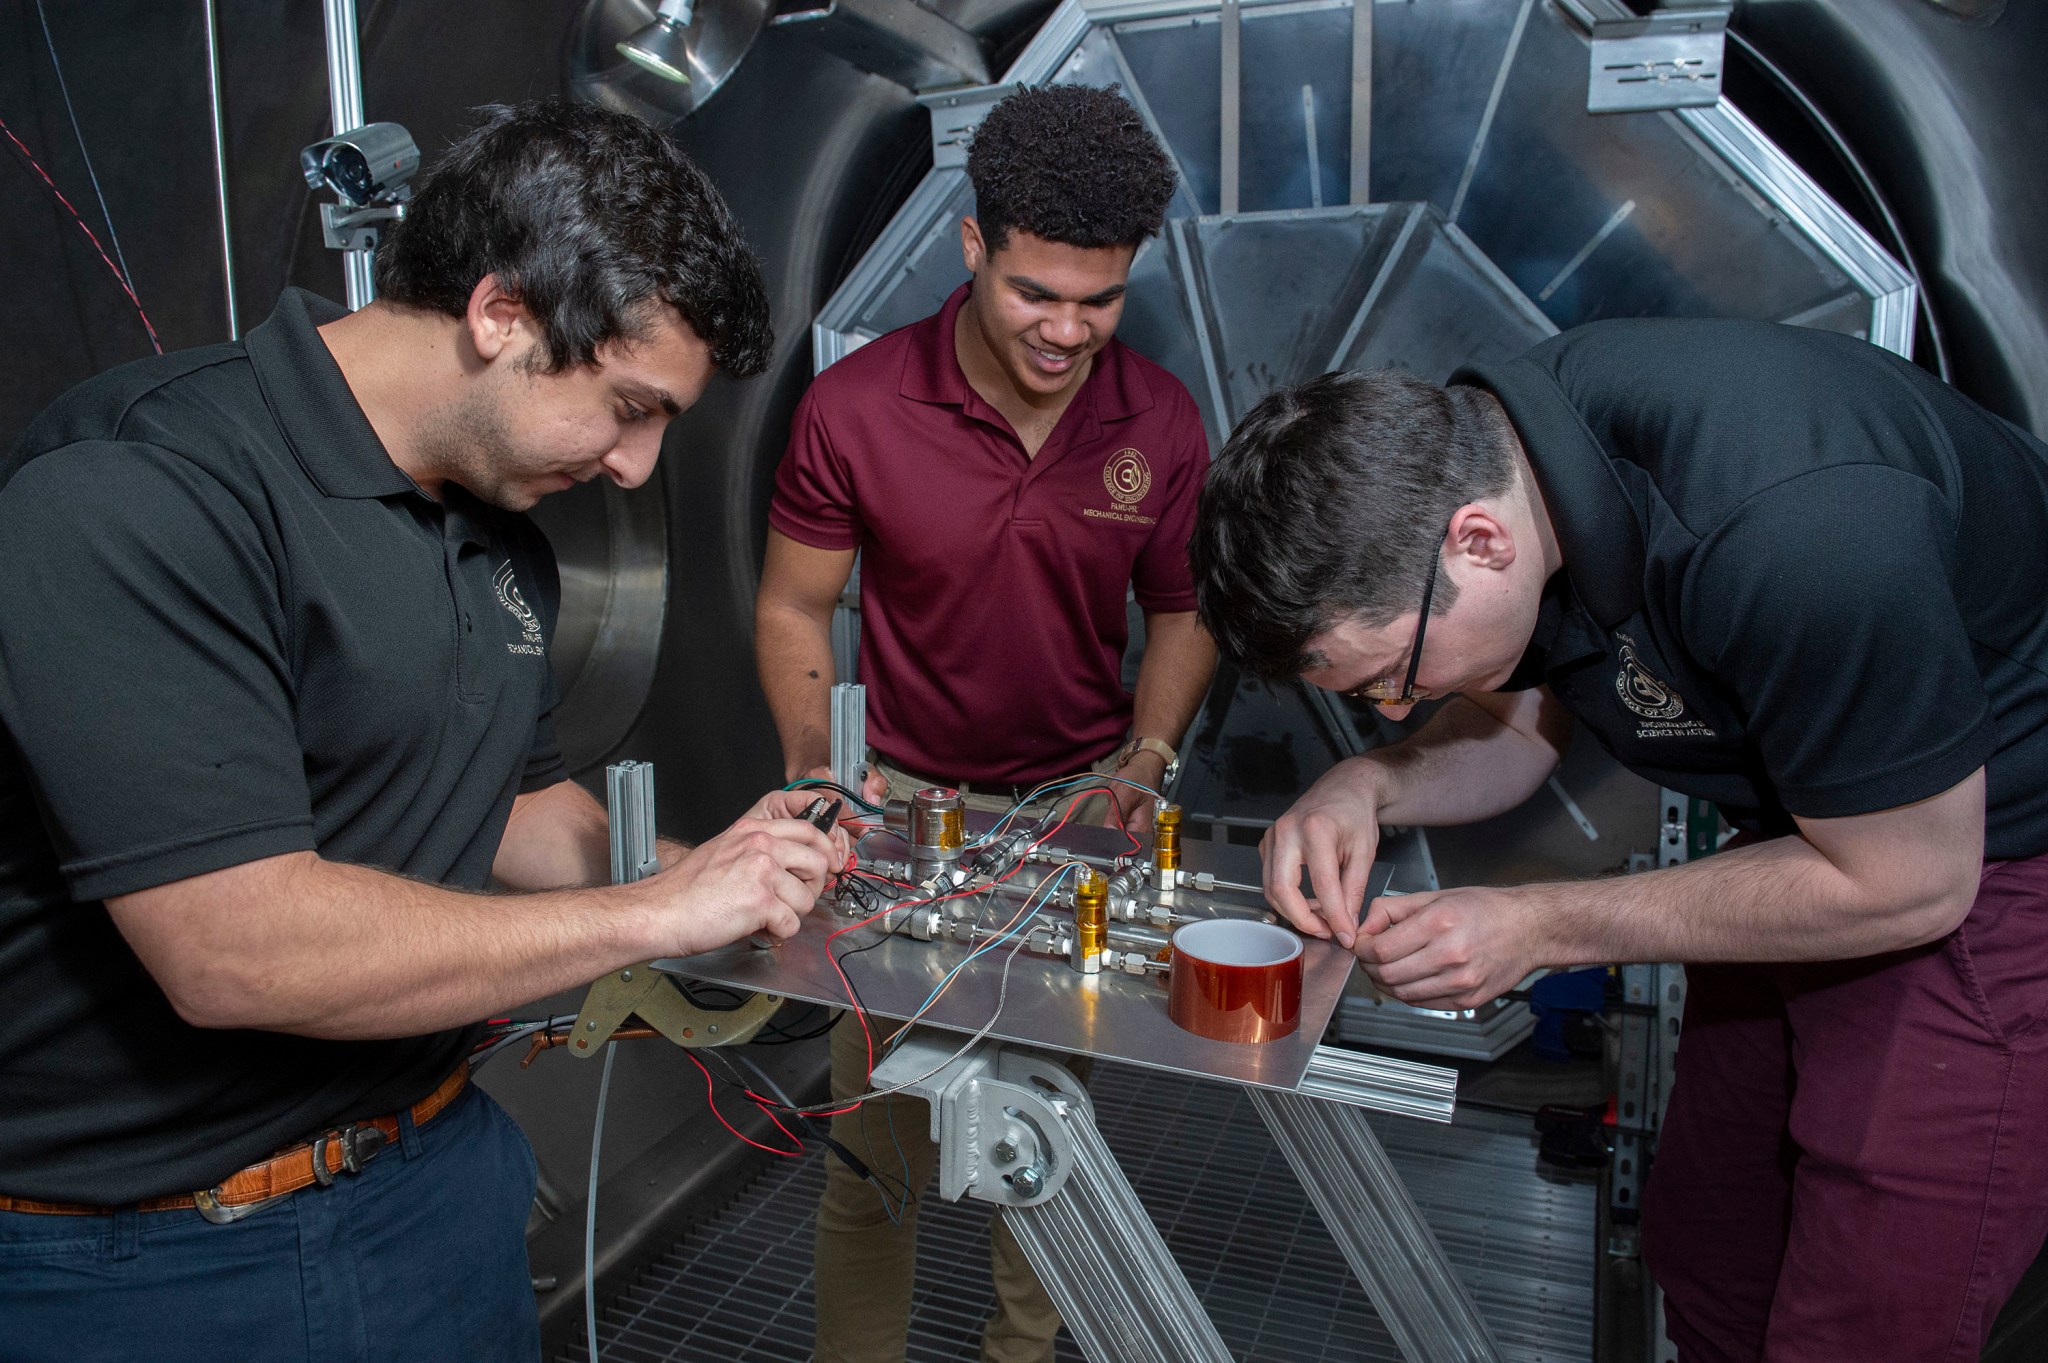 Students from Florida State University in Tallahassee work on a senior project related to NASA's Psyche mission.